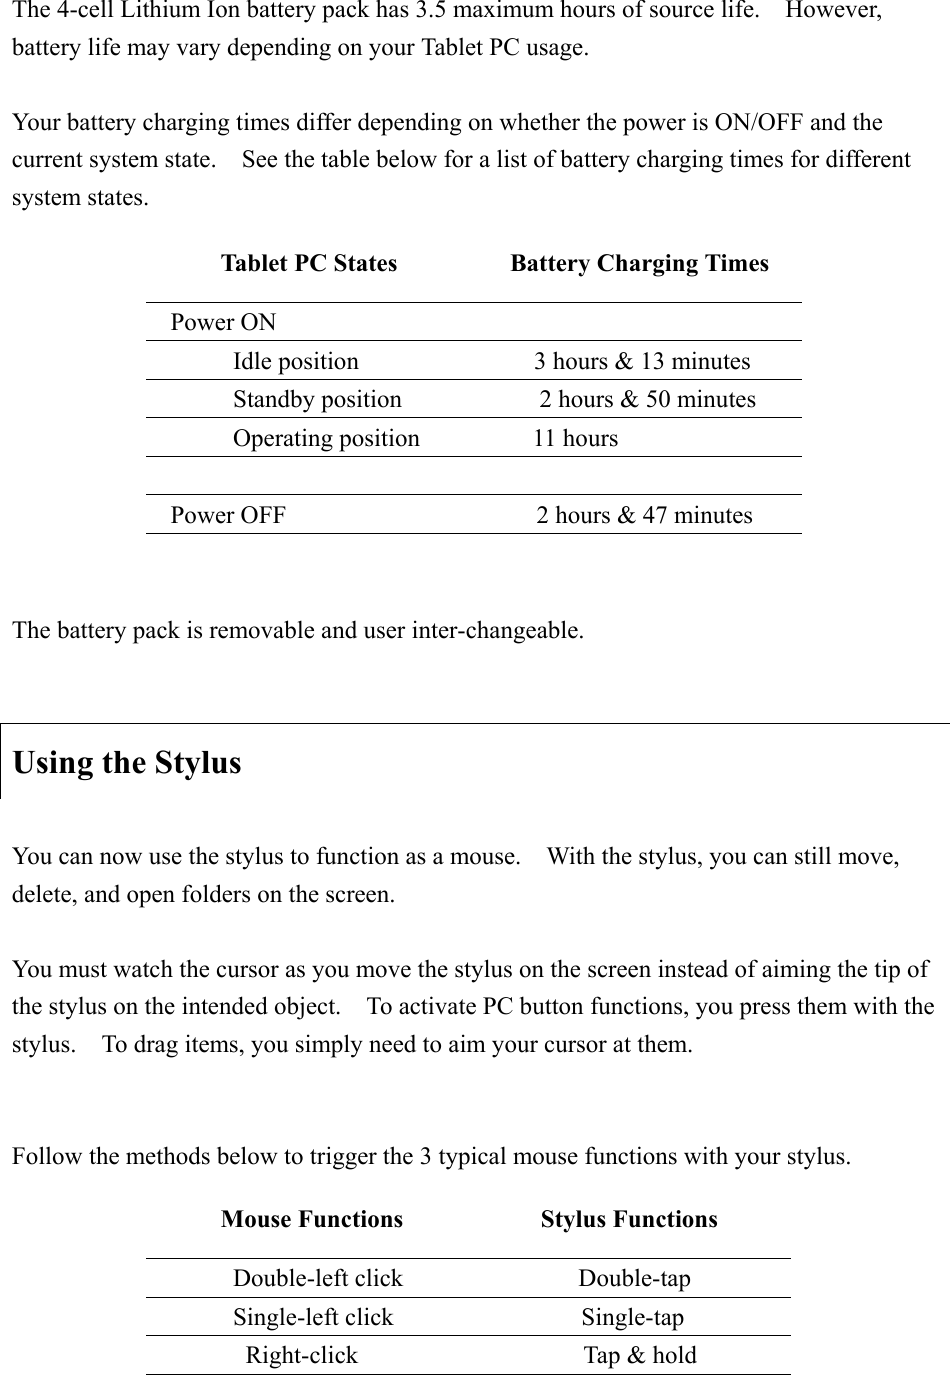 The 4-cell Lithium Ion battery pack has 3.5 maximum hours of source life.    However, battery life may vary depending on your Tablet PC usage.     Your battery charging times differ depending on whether the power is ON/OFF and the current system state.    See the table below for a list of battery charging times for different system states.   The battery pack is removable and user inter-changeable.     Using the Stylus You can now use the stylus to function as a mouse.    With the stylus, you can still move, delete, and open folders on the screen.     You must watch the cursor as you move the stylus on the screen instead of aiming the tip of the stylus on the intended object.    To activate PC button functions, you press them with the stylus.    To drag items, you simply need to aim your cursor at them. Follow the methods below to trigger the 3 typical mouse functions with your stylus.   Tablet PC States         Battery Charging Times  Power ON   Idle position              3 hours &amp; 13 minutes Standby position           2 hours &amp; 50 minutes       Operating position         11 hours Power OFF                    2 hours &amp; 47 minutes Mouse Functions           Stylus Functions       Double-left click              Double-tap       Single-left click               Single-tap        Right-click                  Tap &amp; hold 